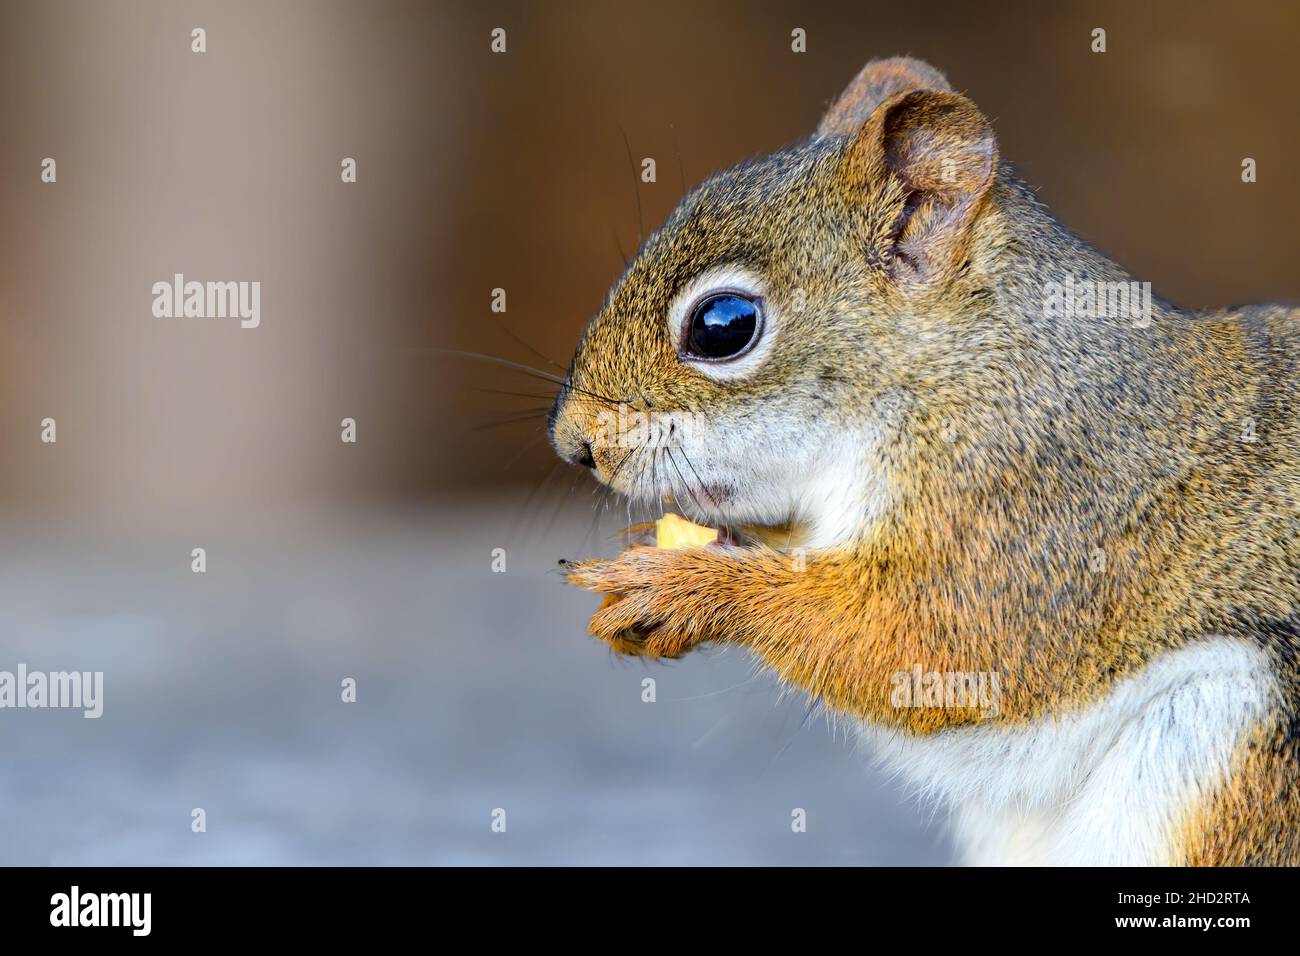 A small red squirrel eats a shelled peanut. Close view from the side, only top half of squirrel visible. Stock Photo